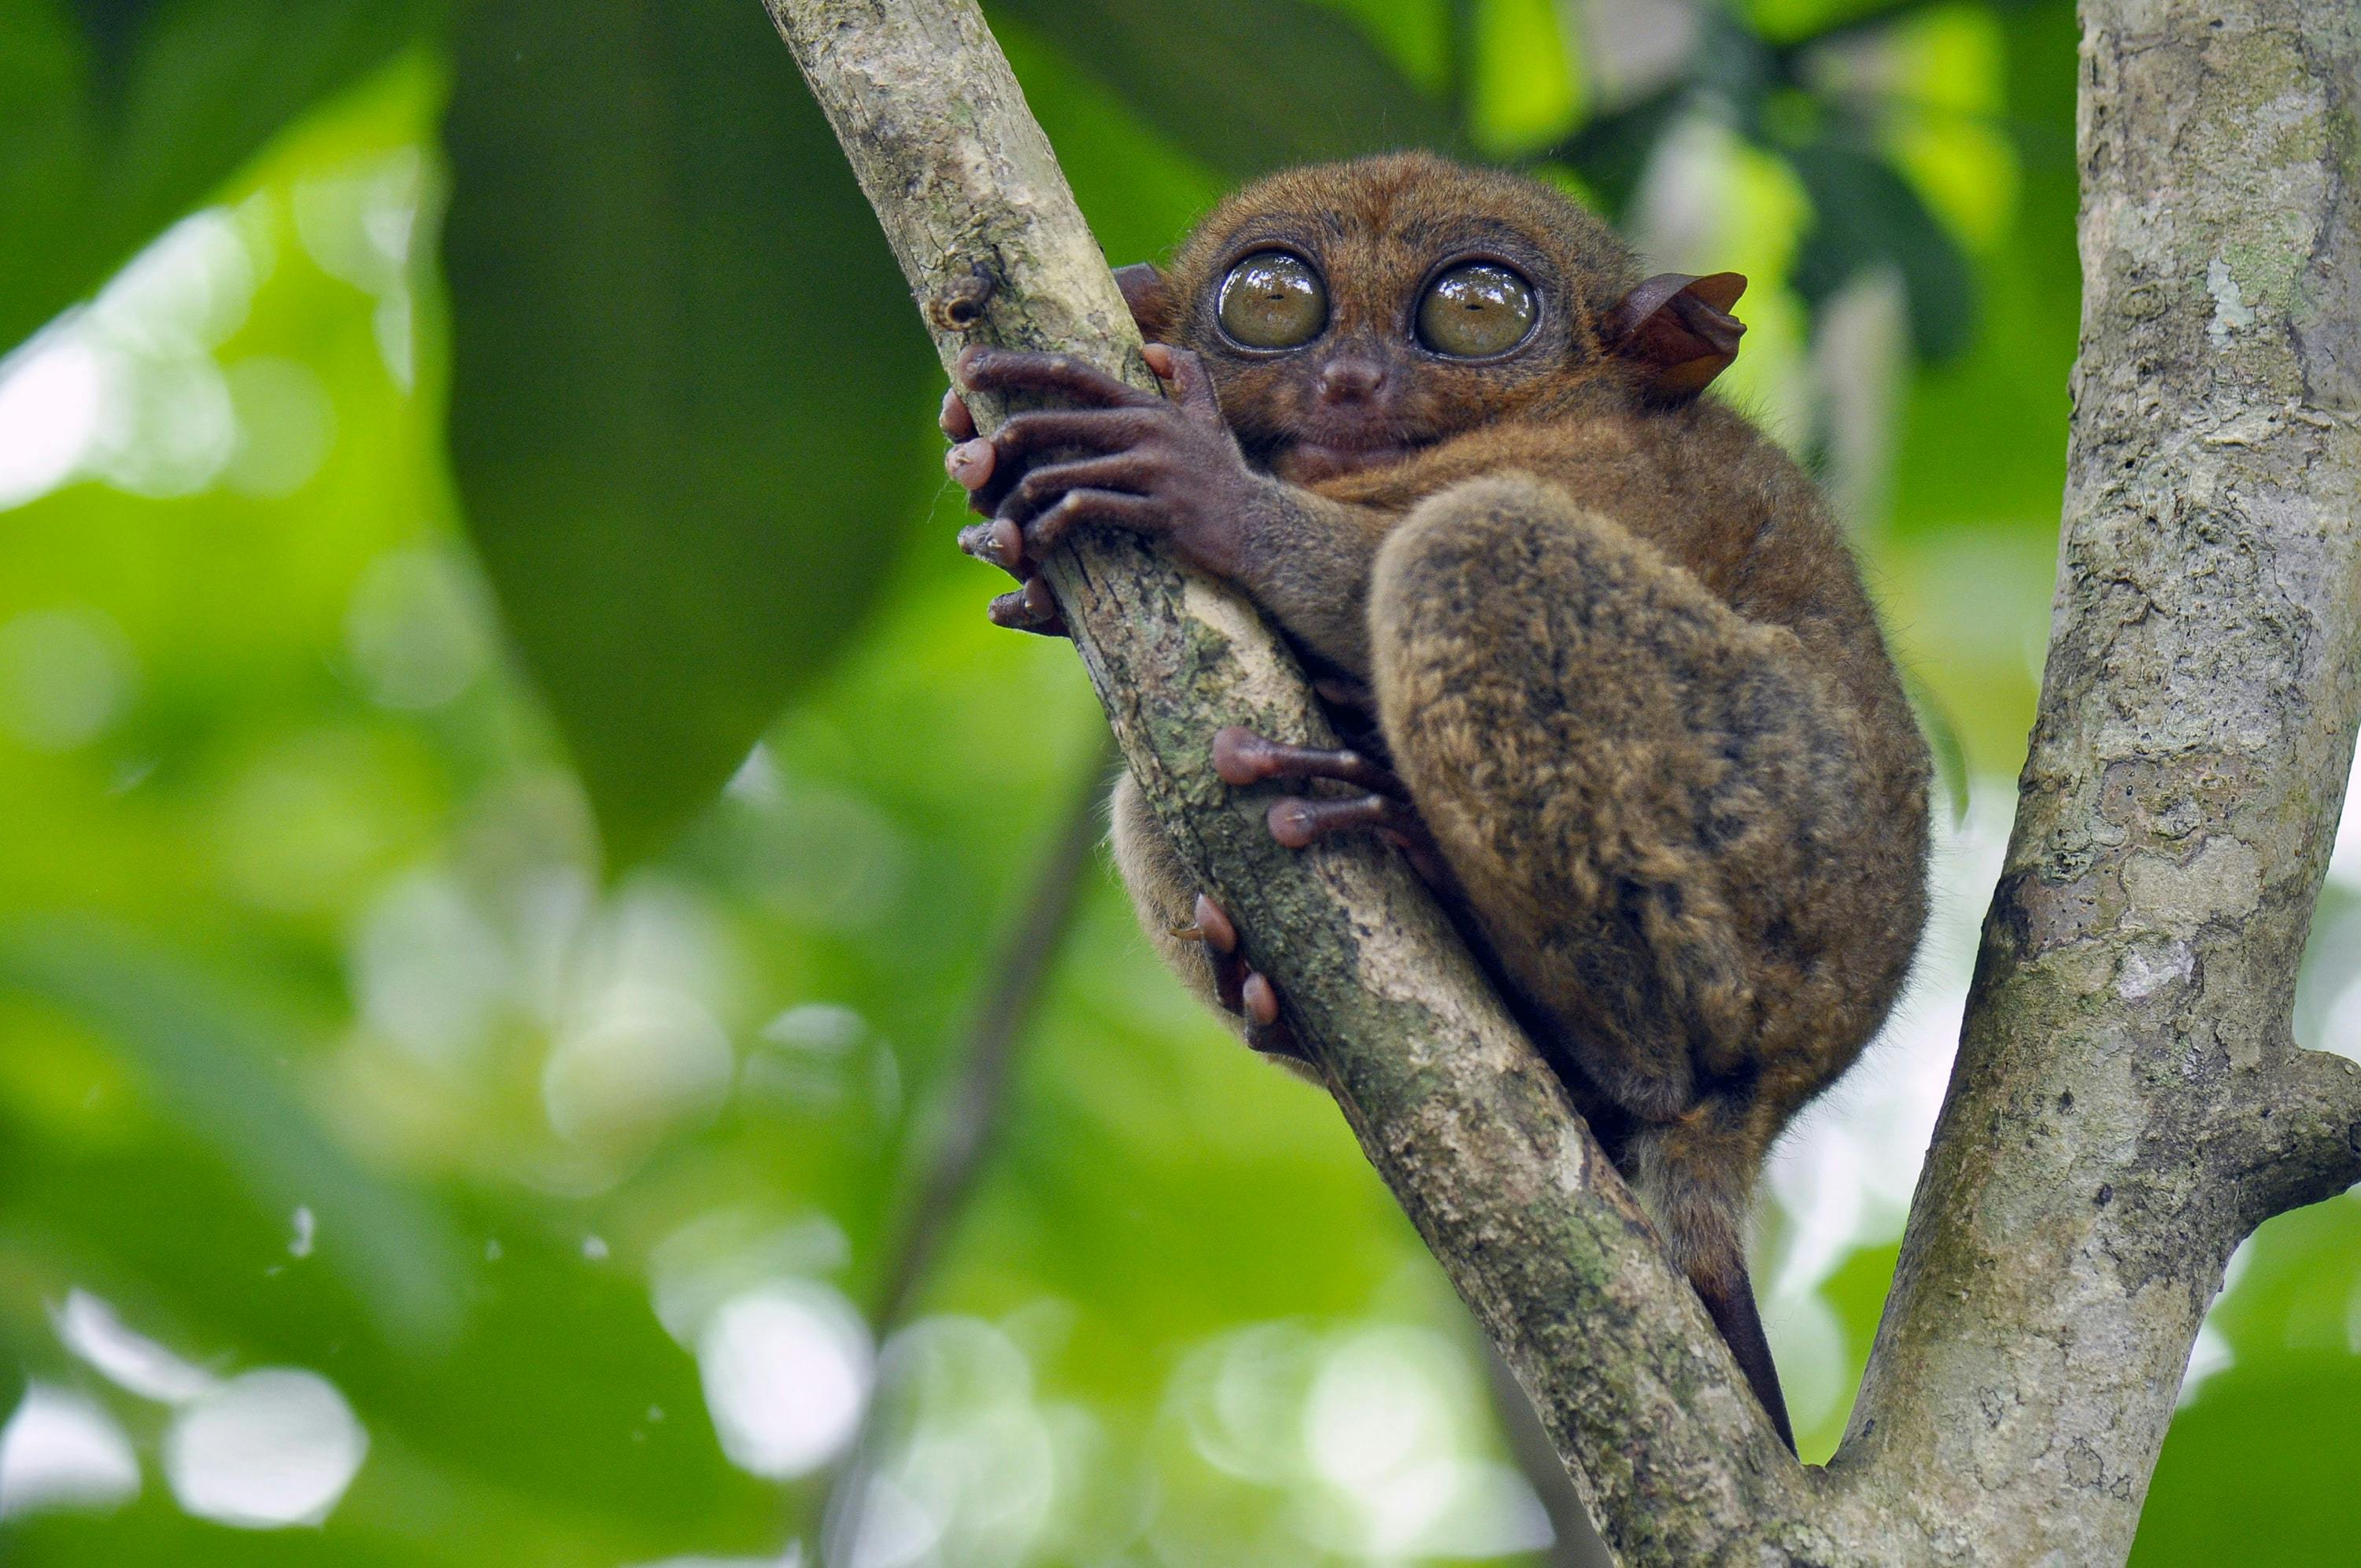 Tarsier in the Conservation Area in Bohol